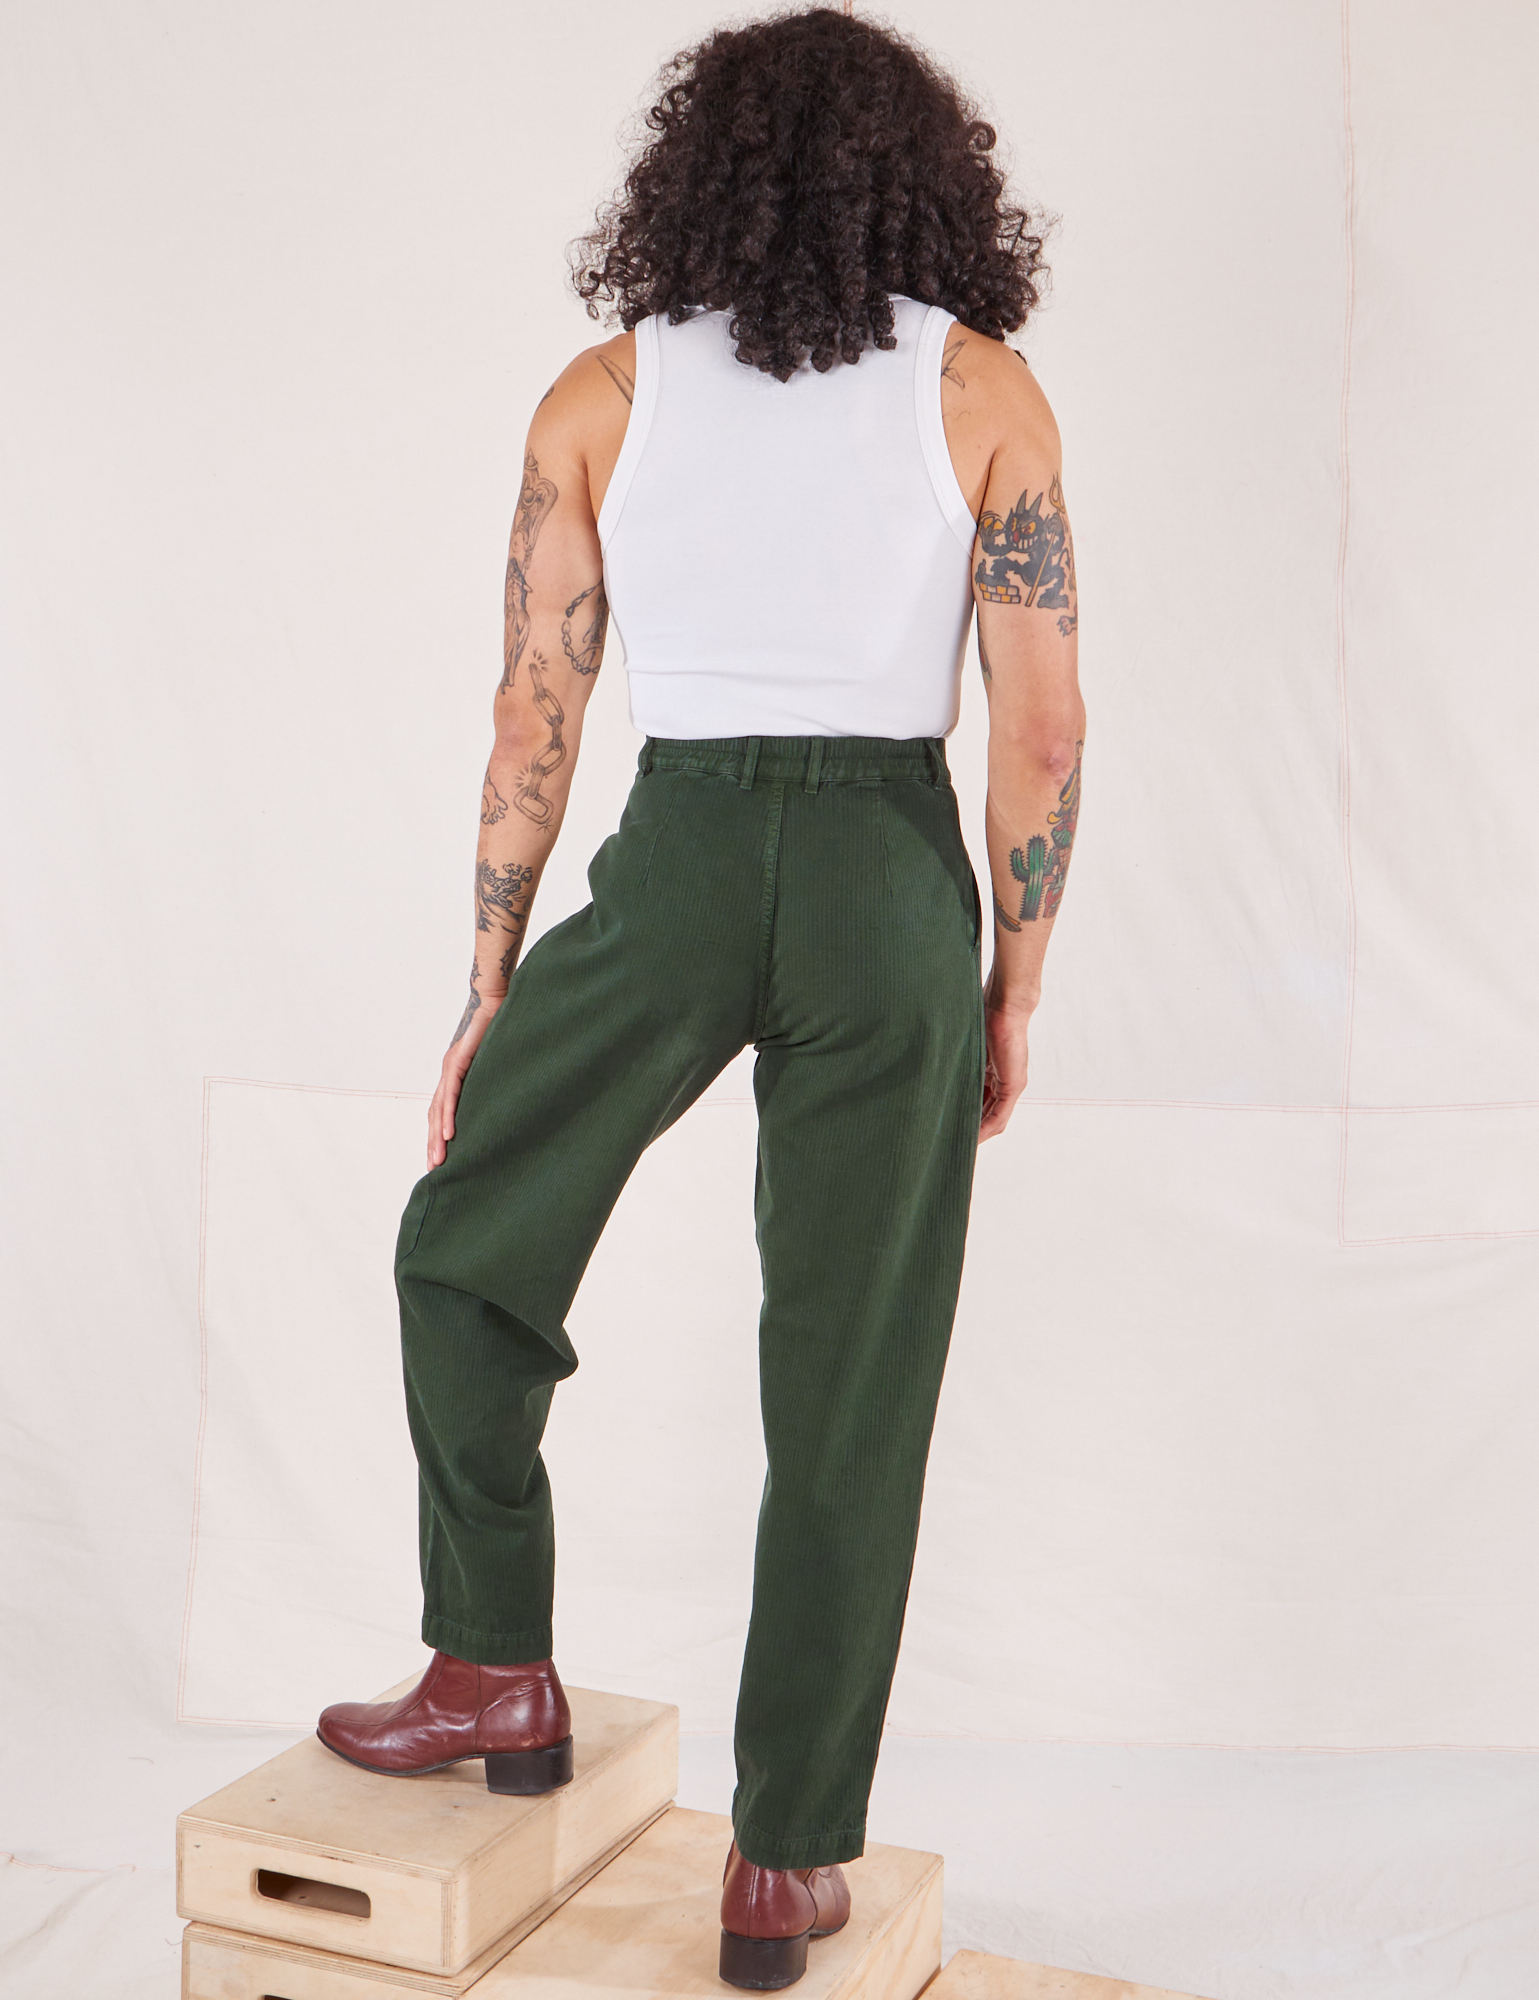 Back view of Heritage Trousers in Swamp Green and Cropped Tank Top in vintage tee off-white